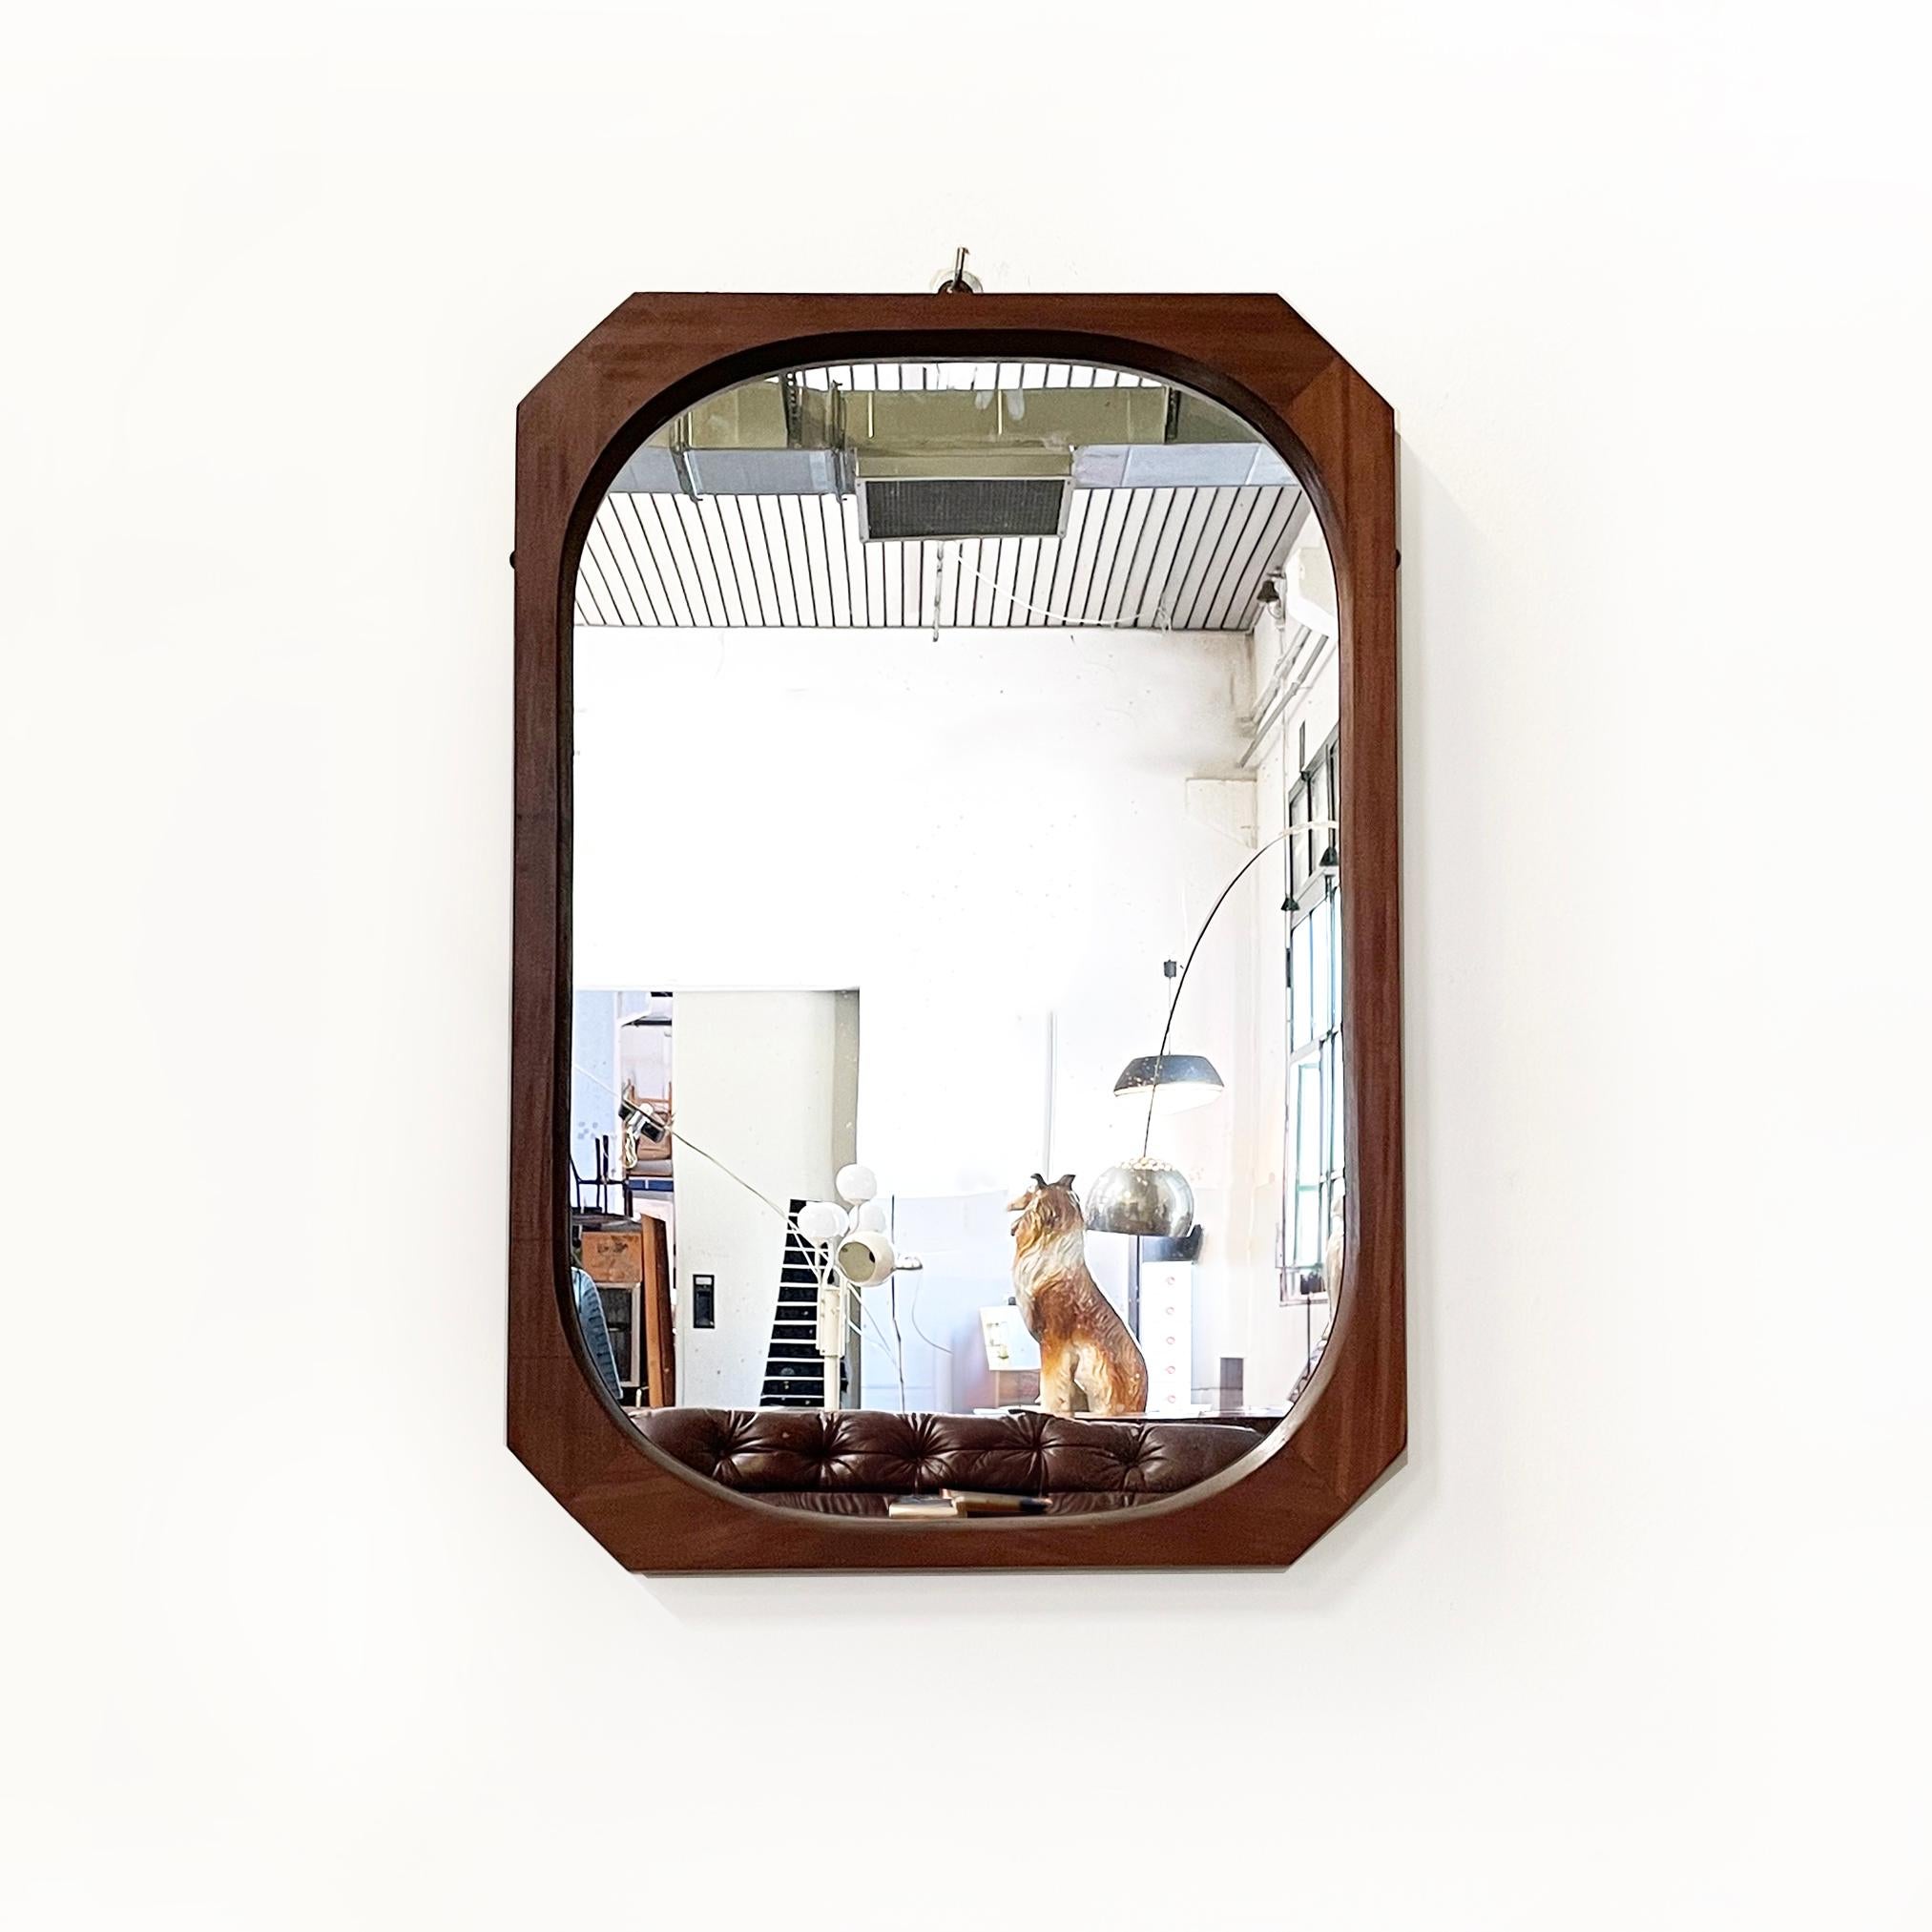 Italian mid-century modern Octagonal Wooden wall mirror, 1960s
Octagonal wall mirror with thick wooden frame. The frame has cut corners, while the internal mirror has an oval shape. At the top it has a metal eyelet for hanging.
1960 approx.
Good